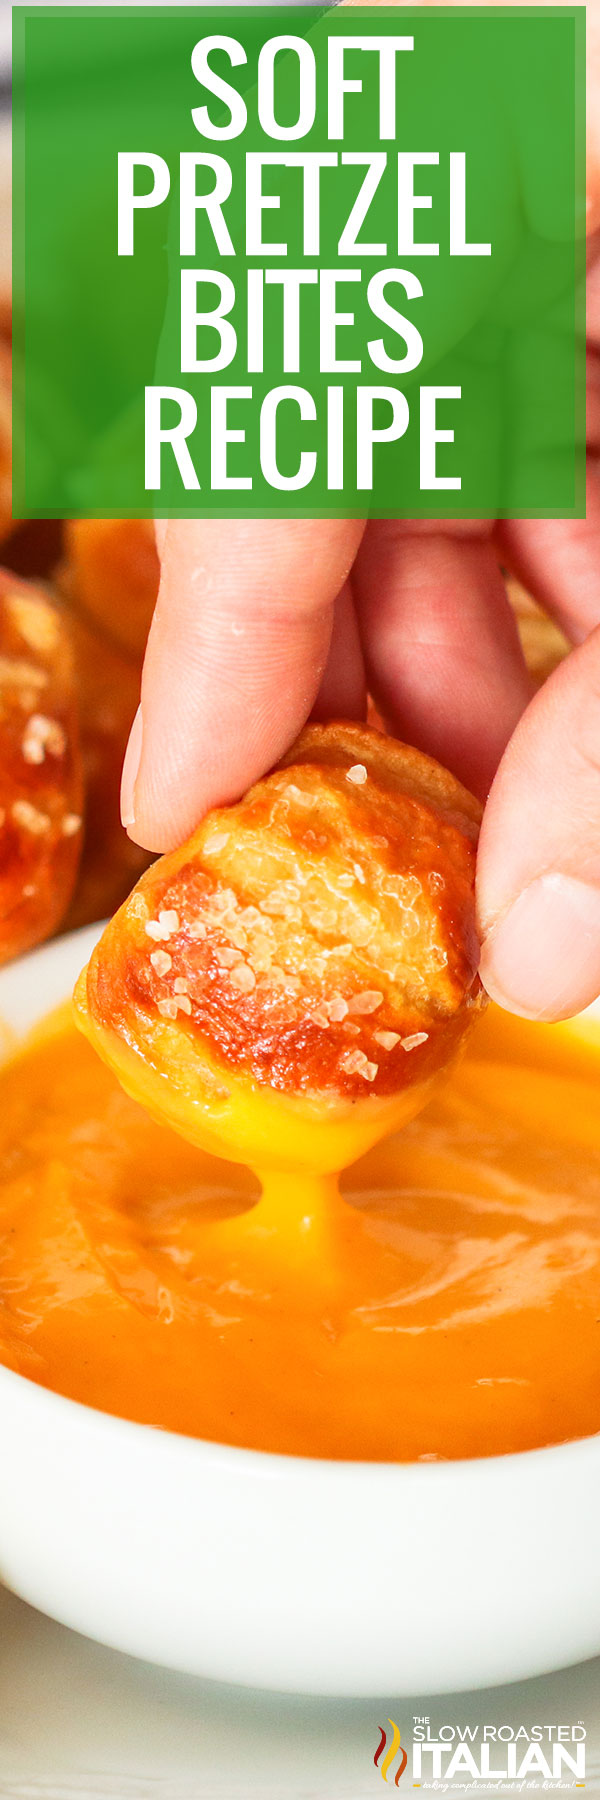 Title text (shown dipping into cheese): Soft Pretzel Bites Recipe